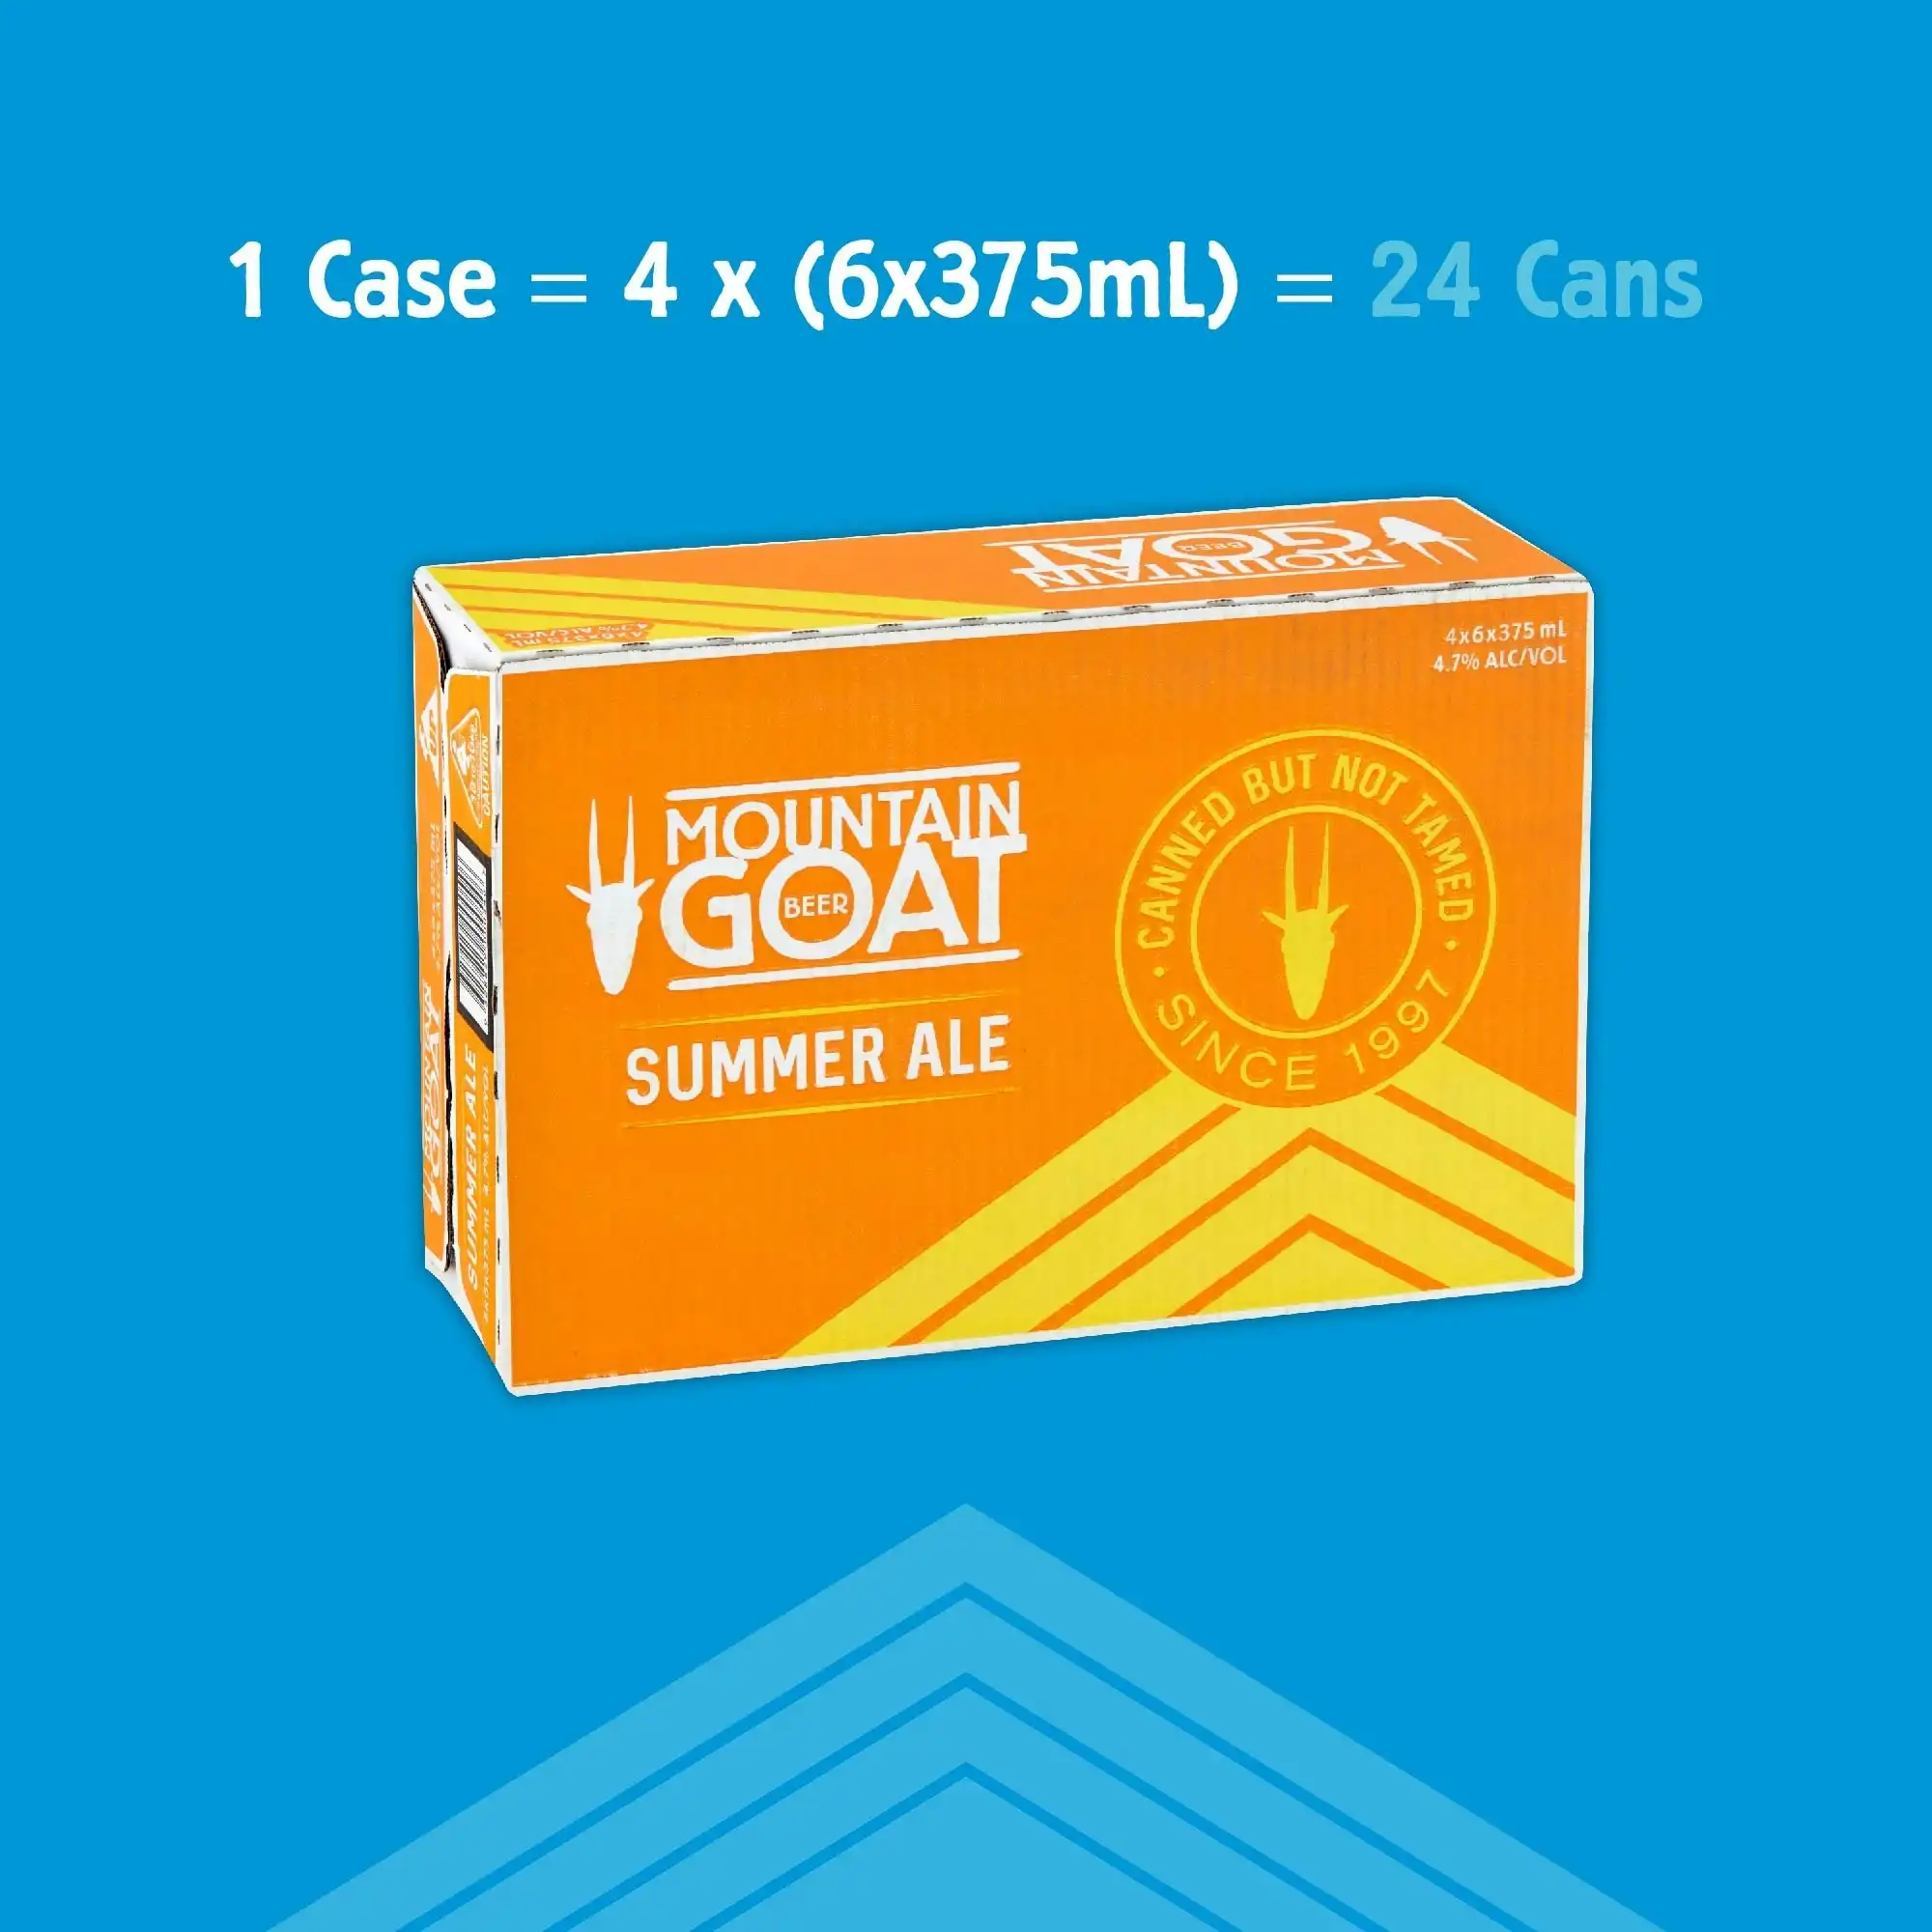 Mountain Goat Summer Ale Beer 24 x 375mL Cans